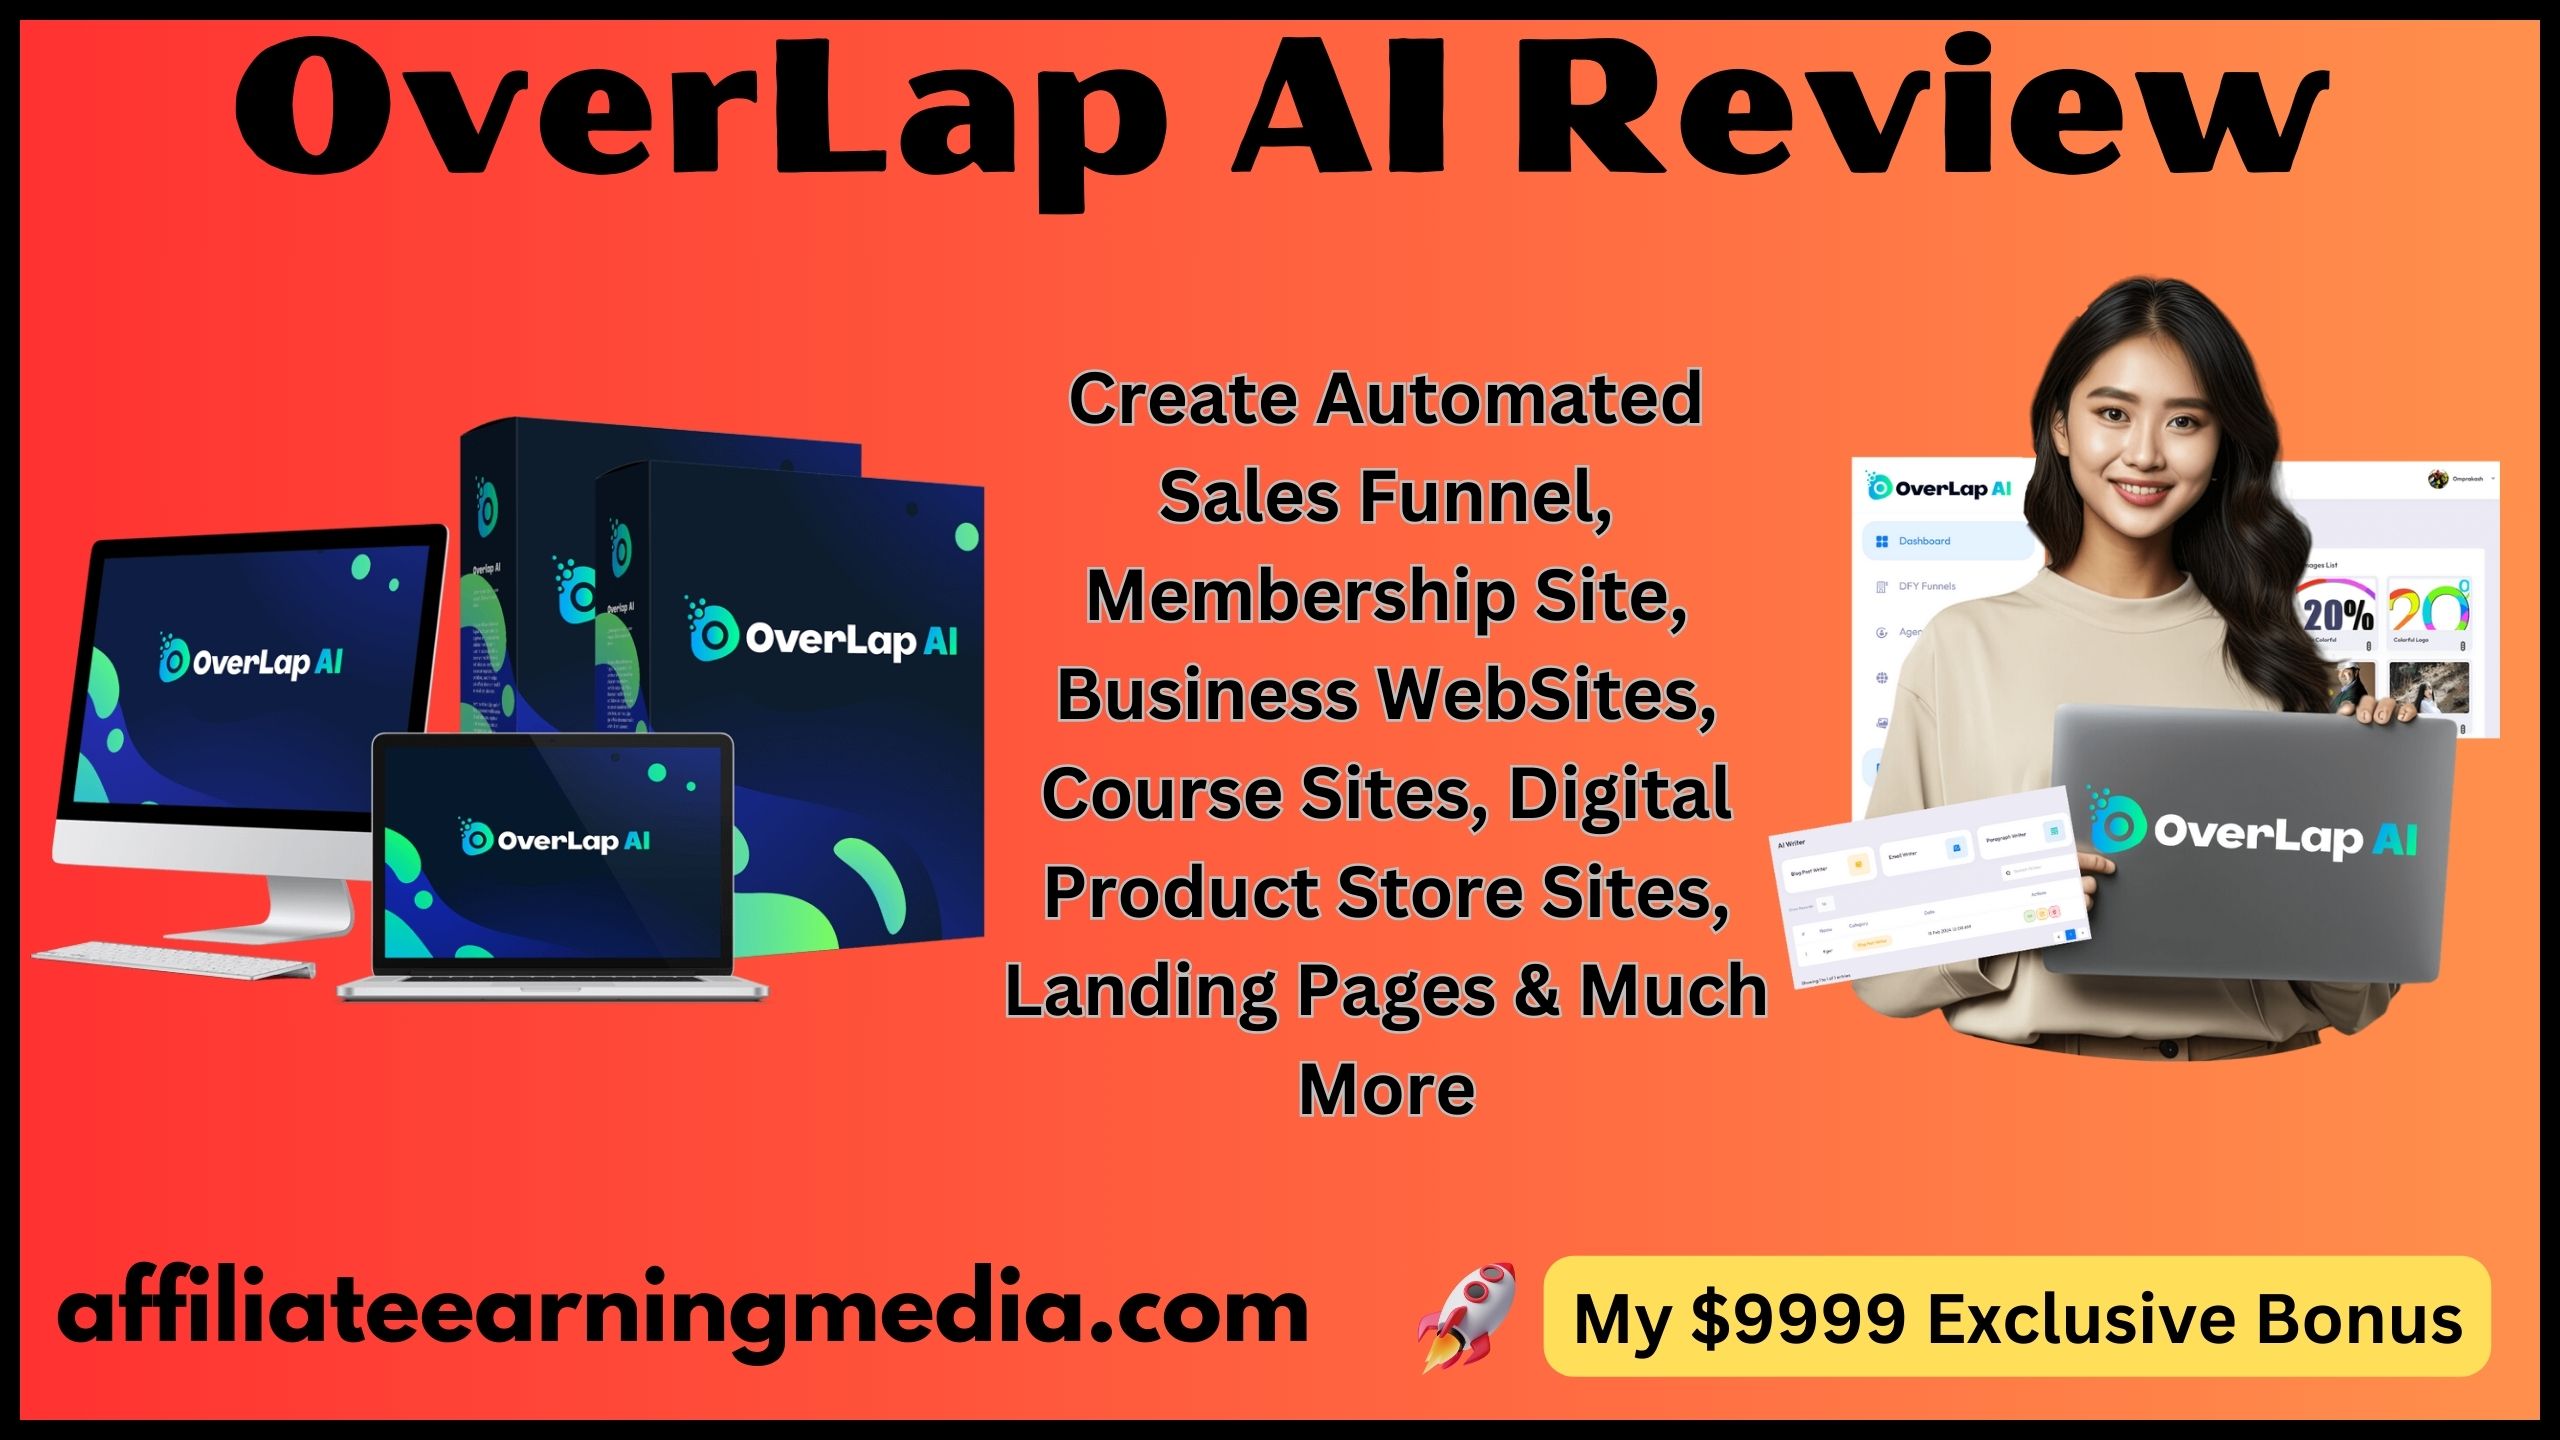 OverLap AI Review - Create Automated Sales Funnel